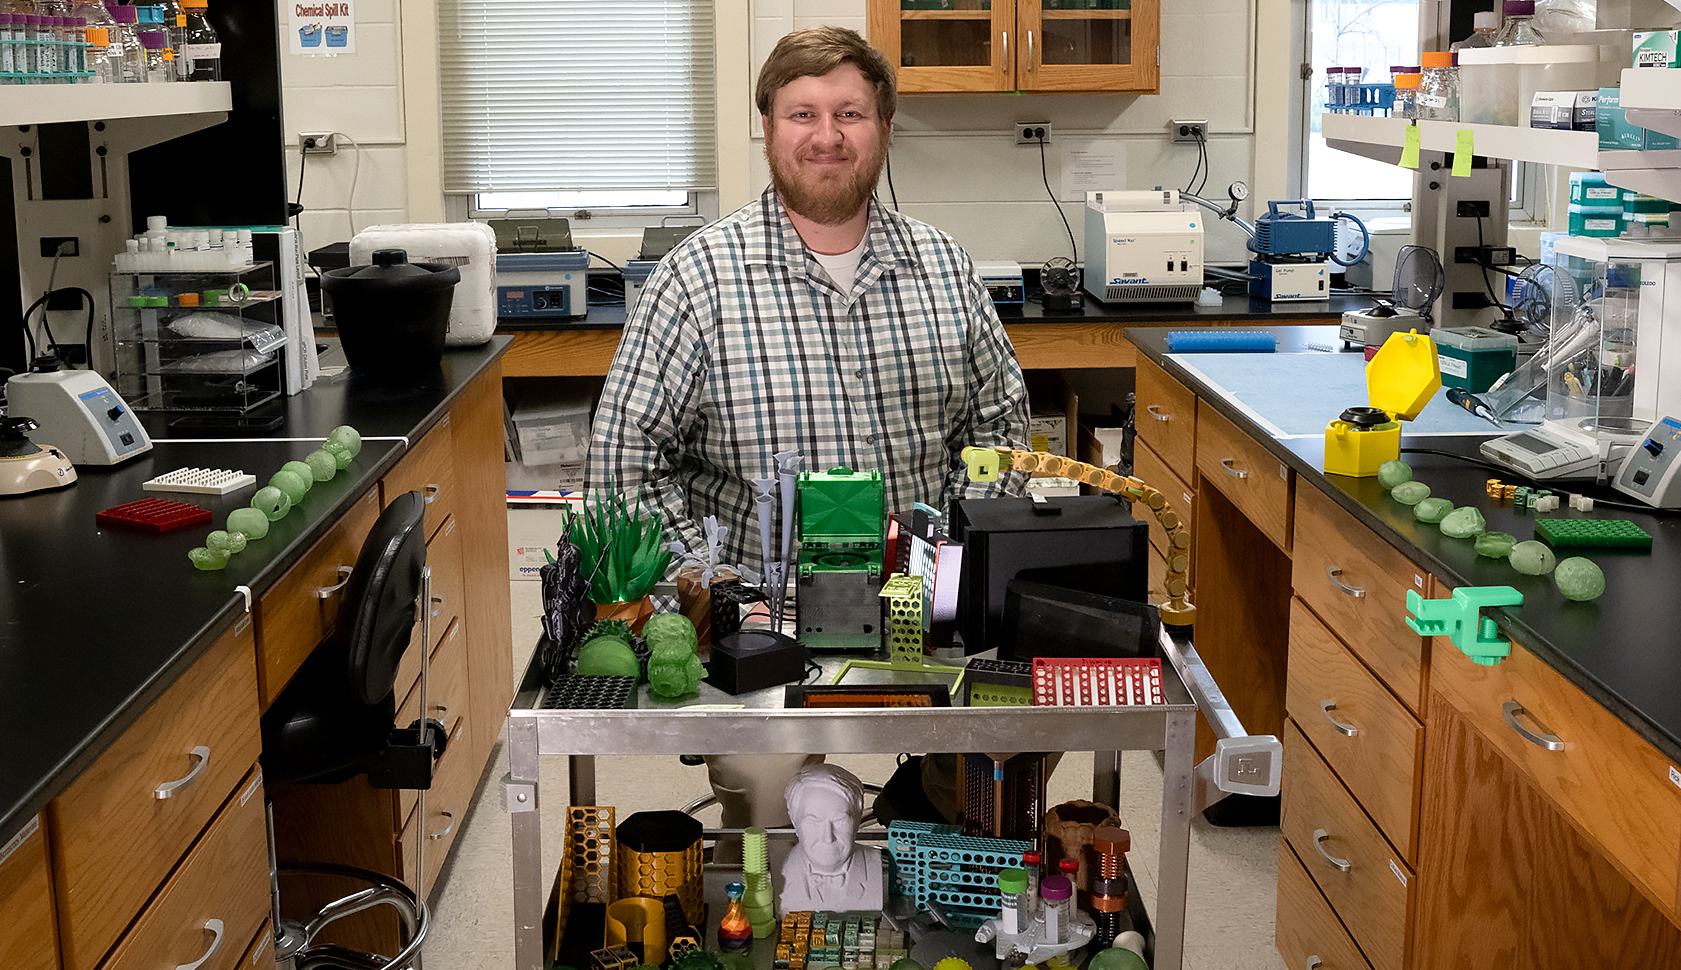 Mason McNair, a master’s student in plant biology, turned an interest in 3D printers into a serious asset for his research laboratory